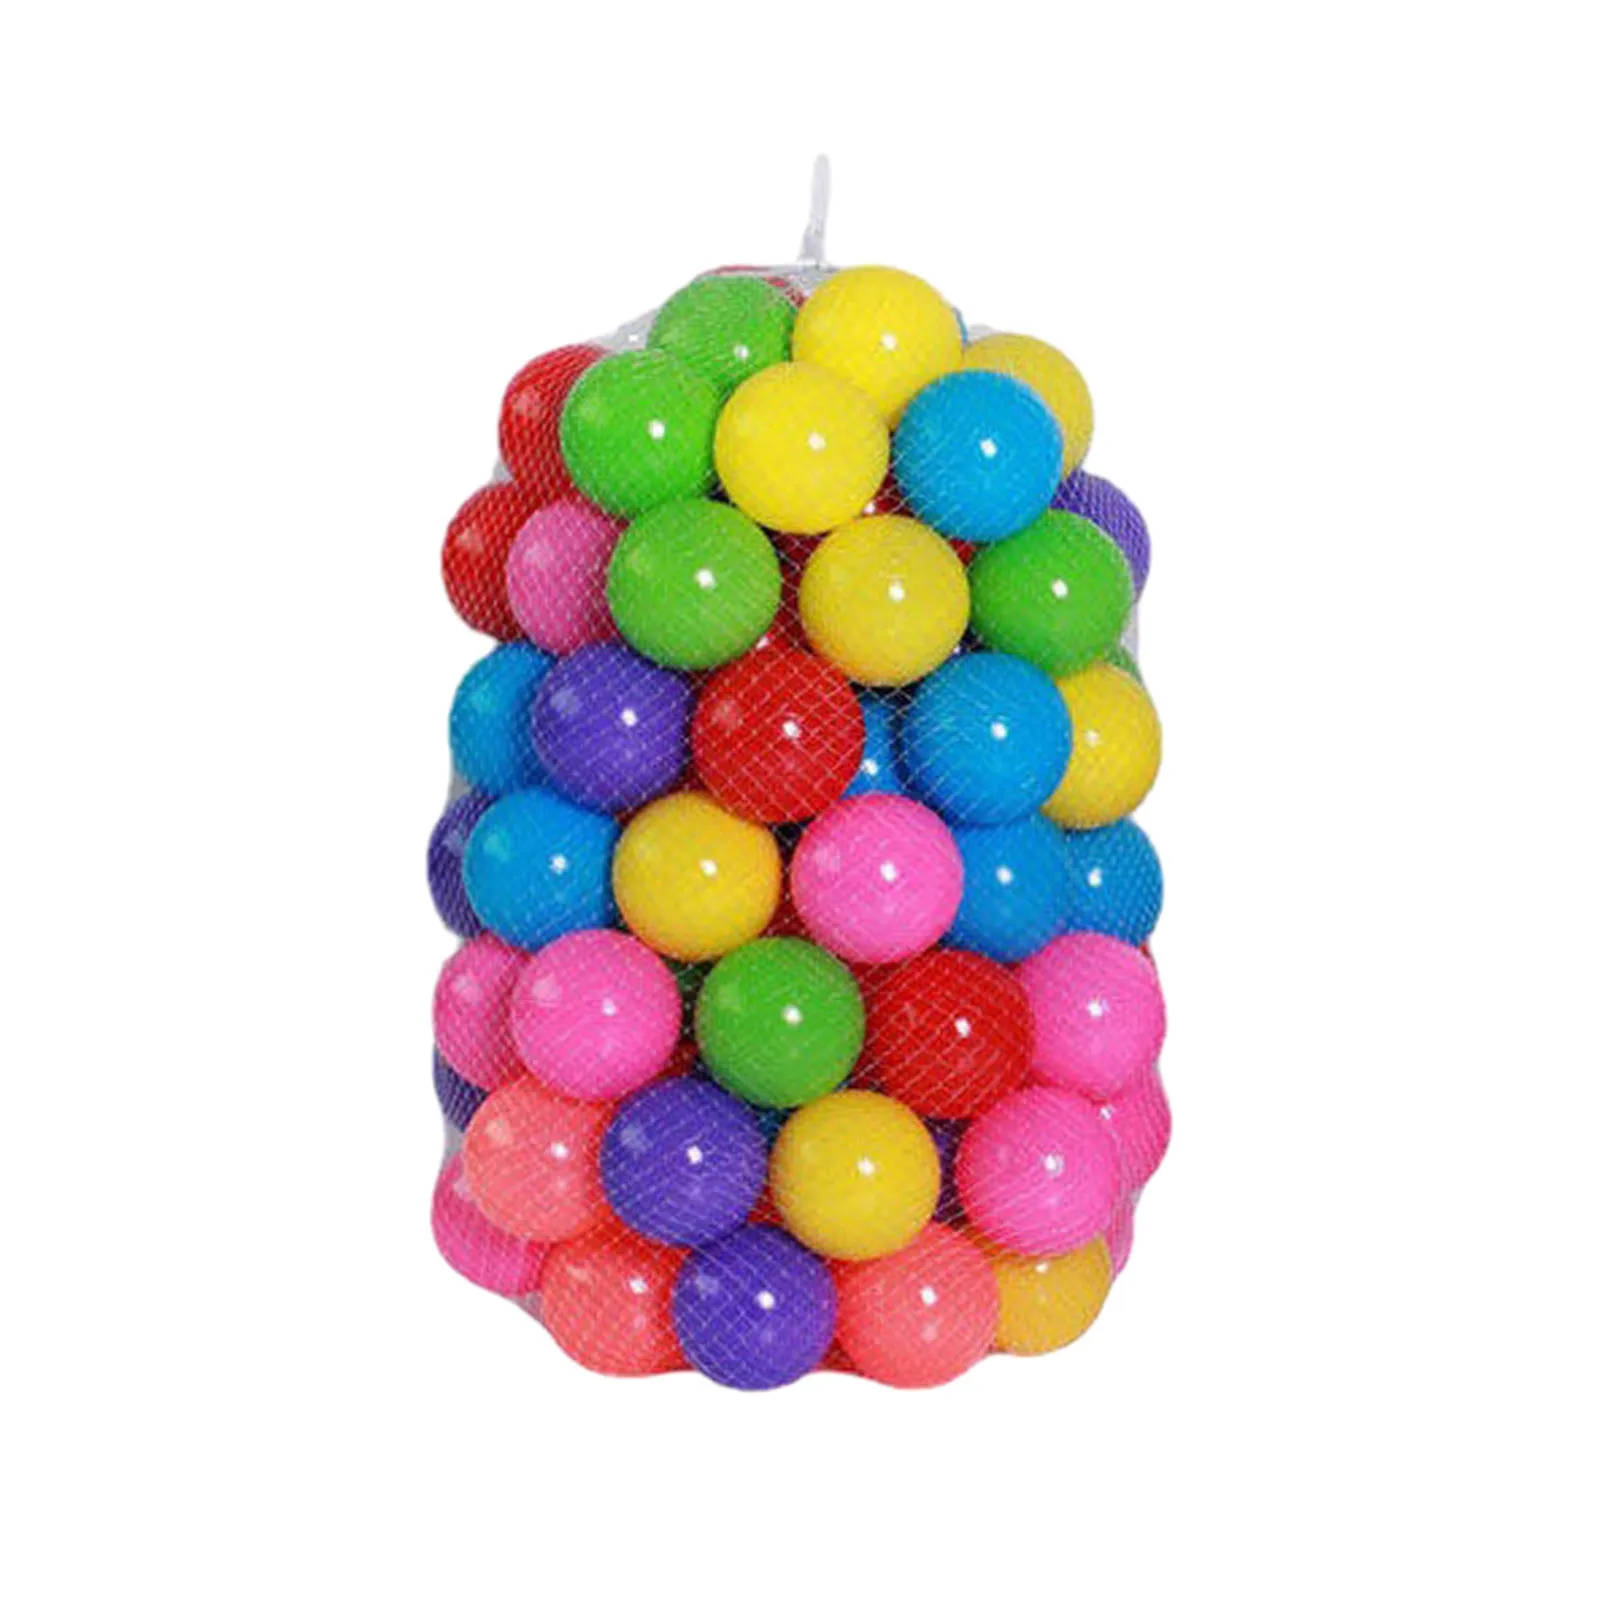 

20/25/50/100PCS Soft Plastic Ball Pit Toys for Boys Eco-friendly Ball Pool Ocean Wave Ball Pit Colorful Balls Dia 5.5cm Ball Toy